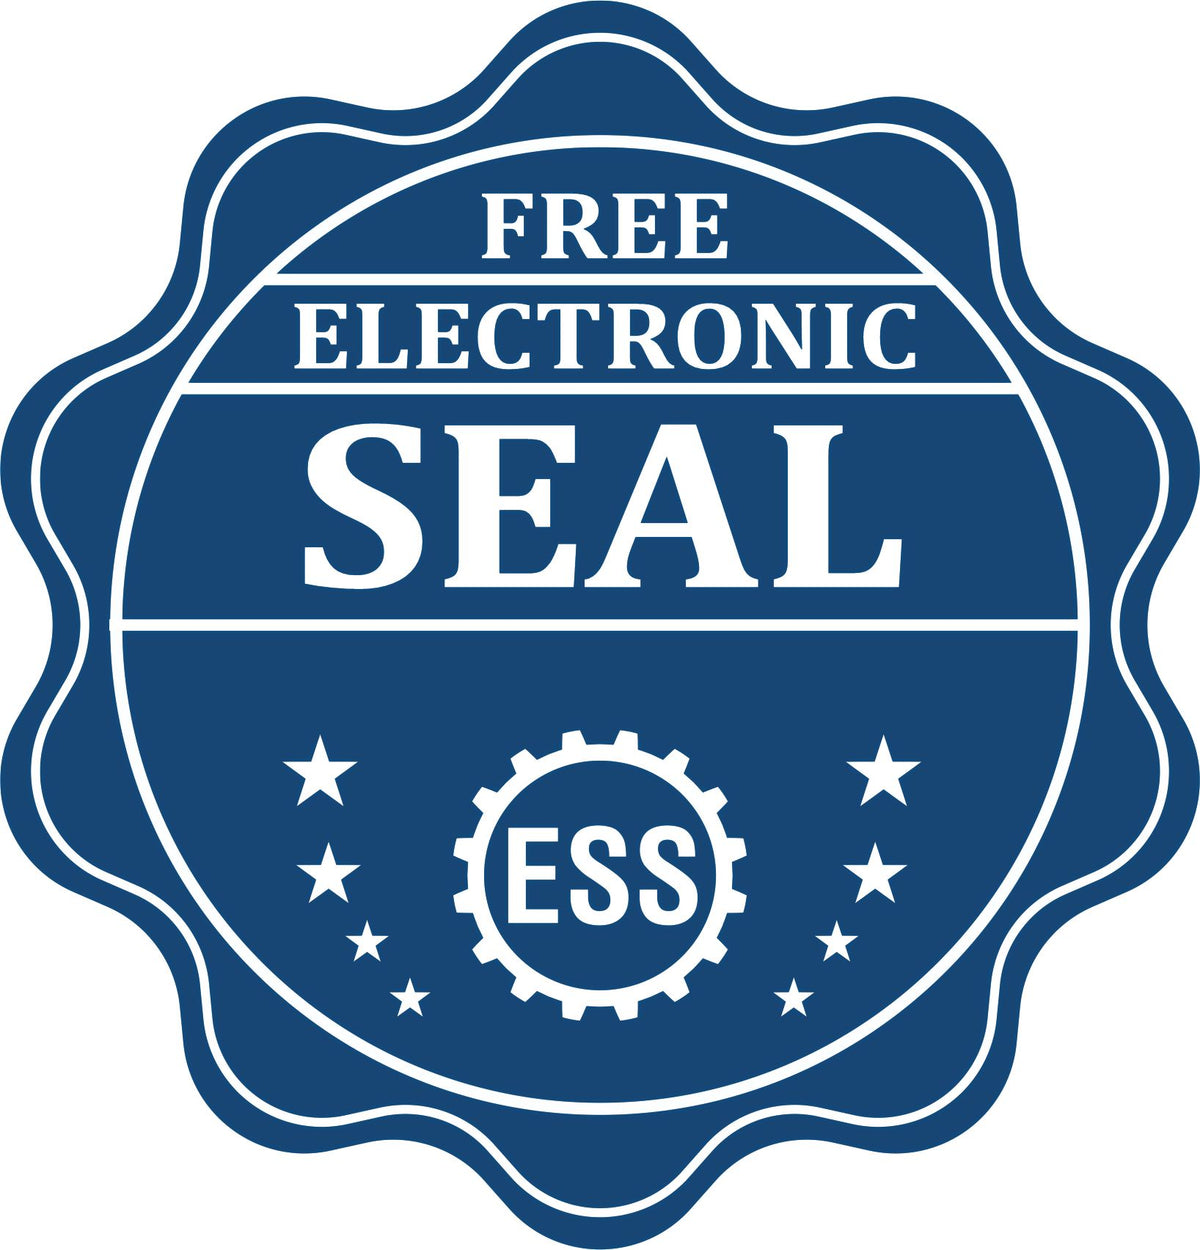 A badge showing a free electronic seal for the Soft California Professional Engineer Seal with stars and the ESS gear on the emblem.